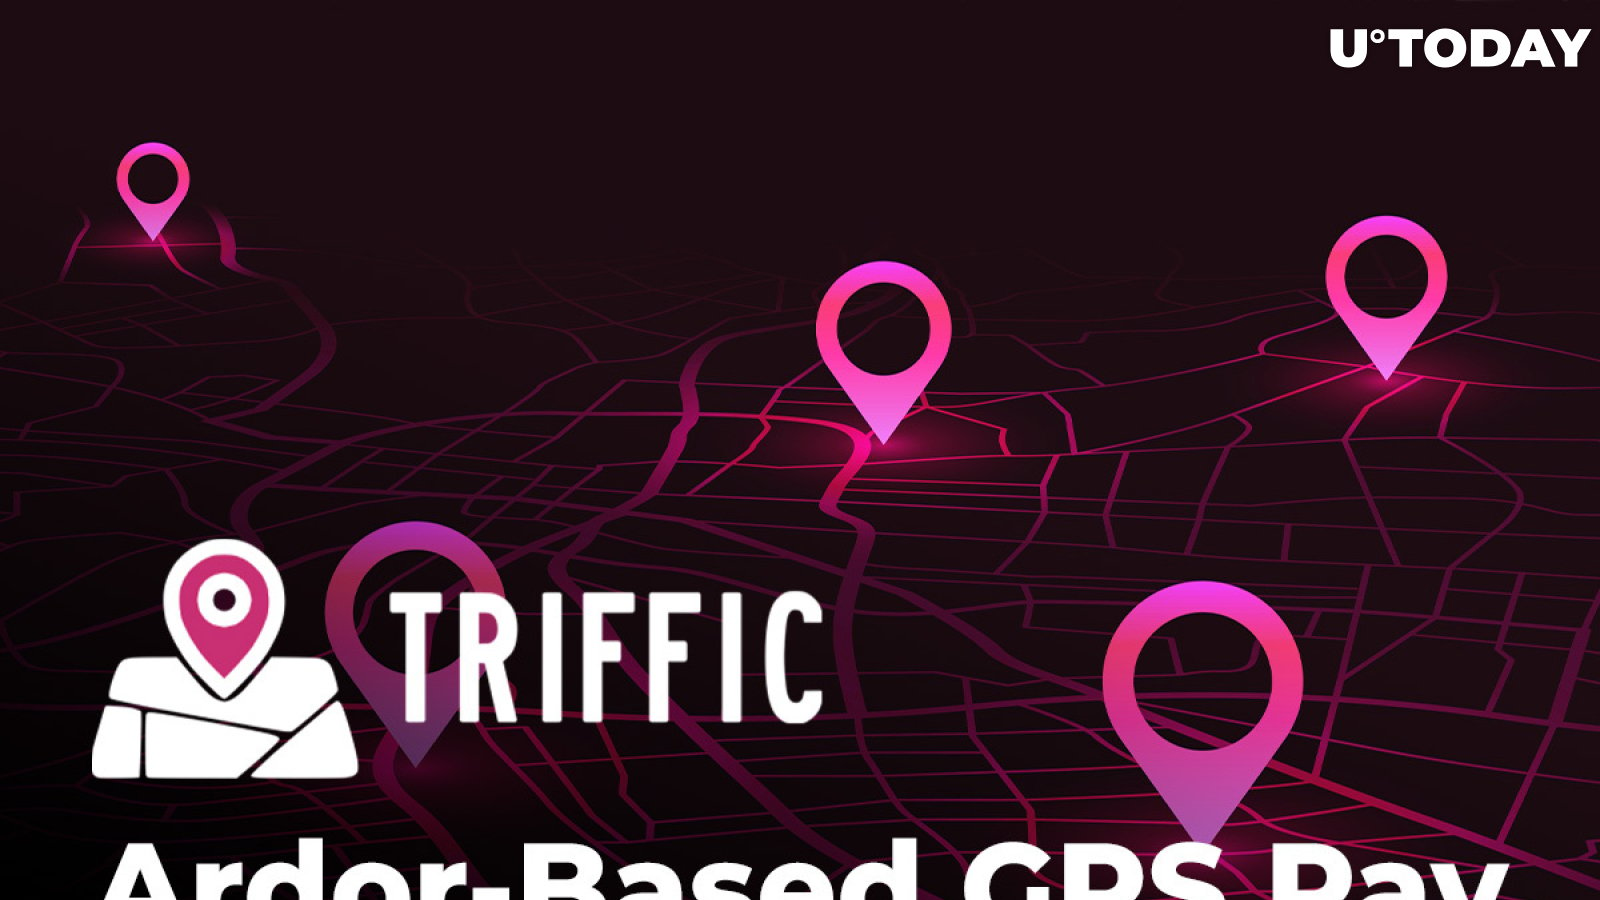 Ardor-Based GPS Pay Launched in Beta by Triffic App